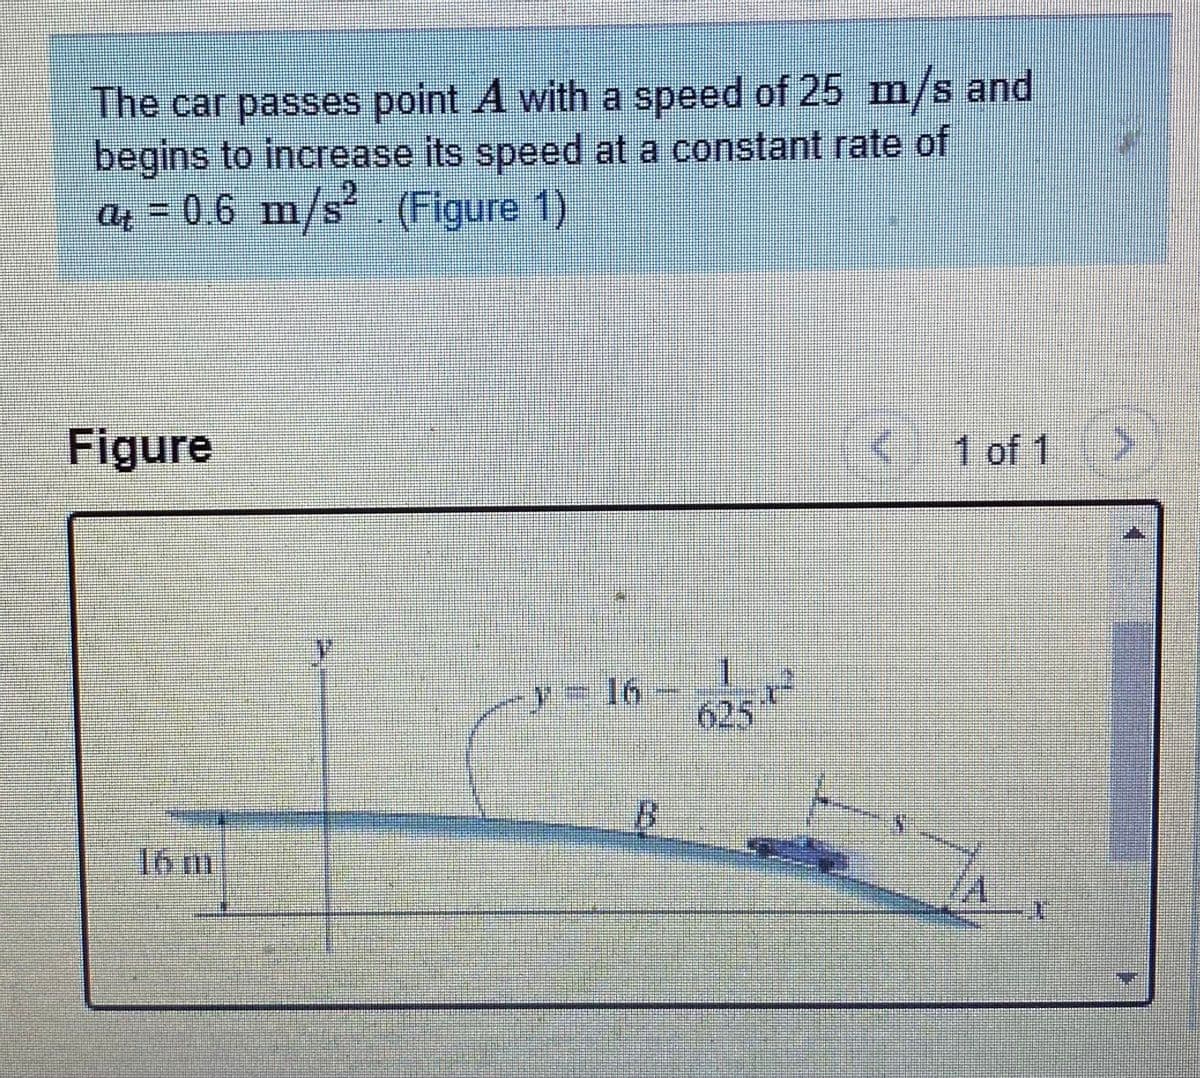 The car passes point A with a speed of 25 m/s and
begins to increase its speed at a constant rate of
a = 0.6 m/s'. (Figure 1)
Figure
1 of 1
/= 16
625
B.
16 m
